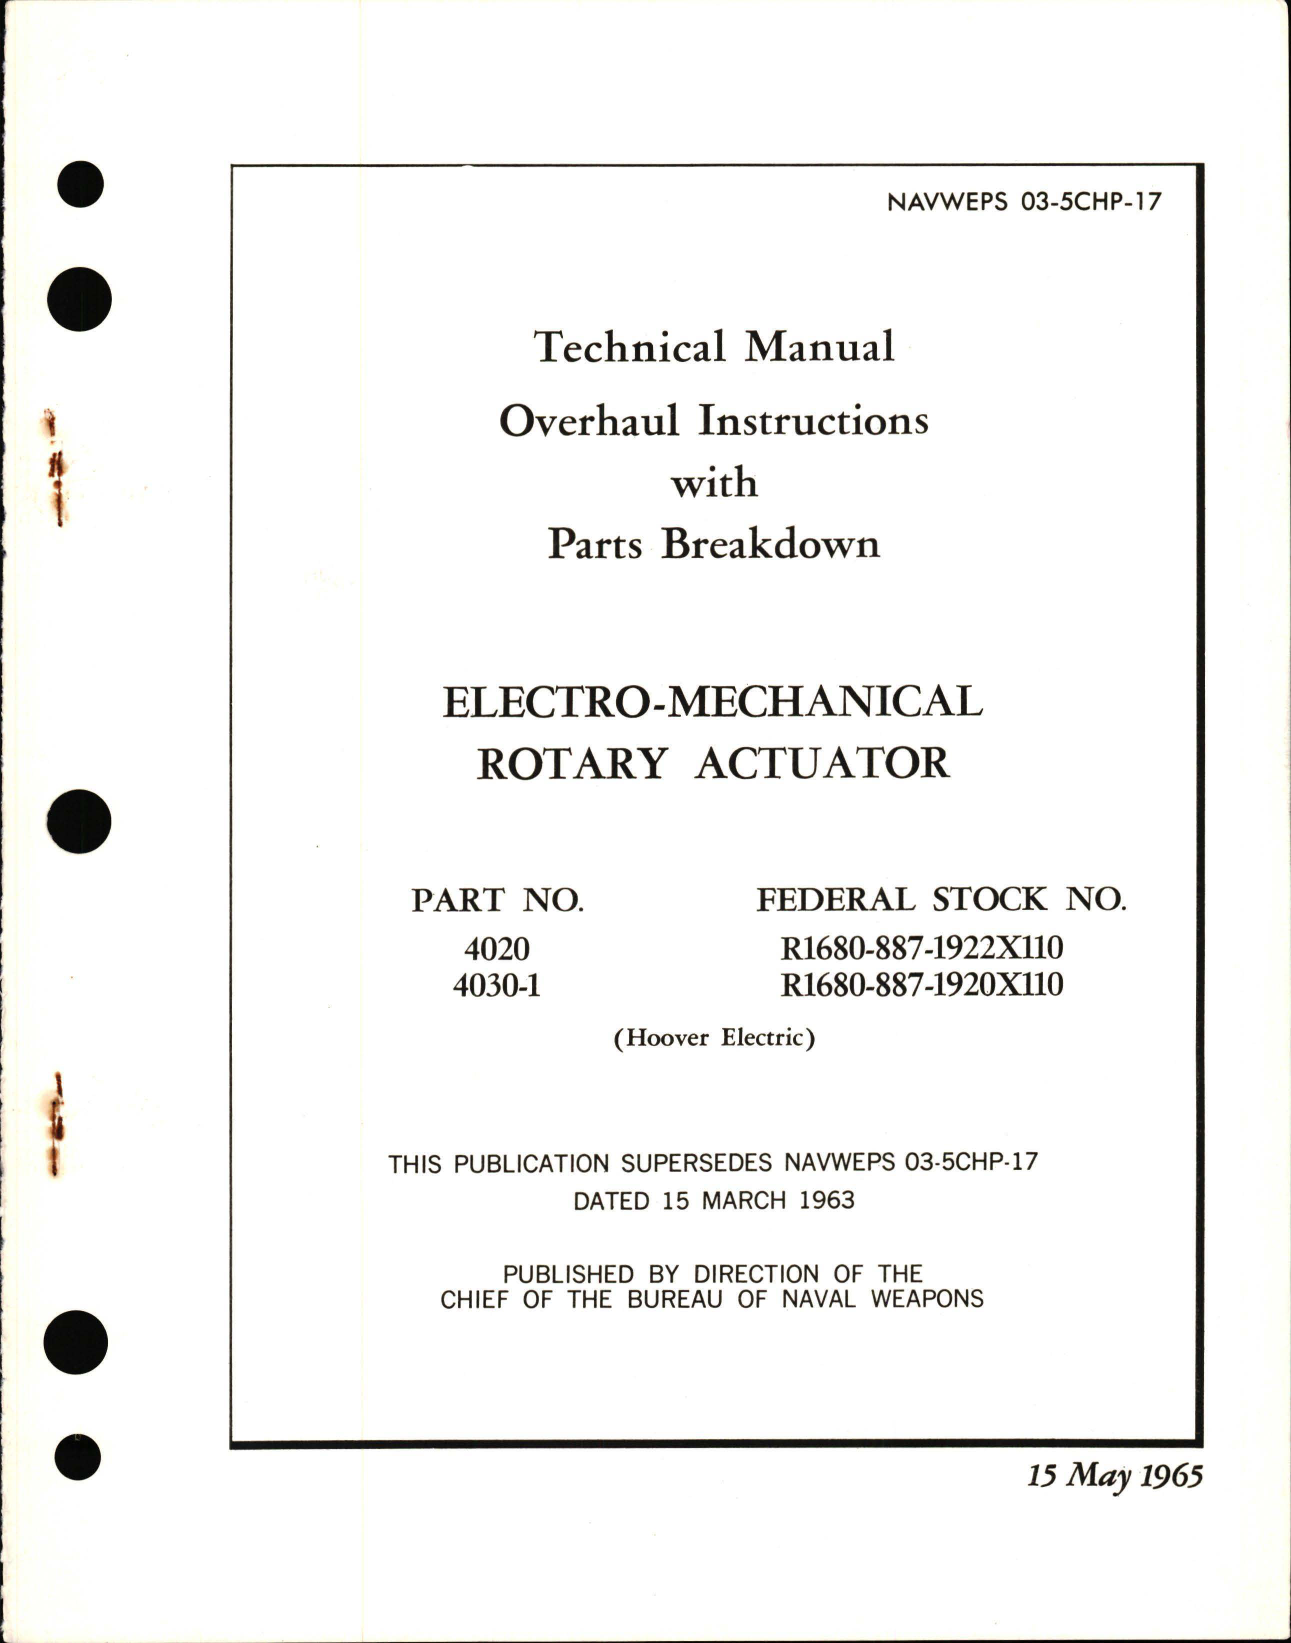 Sample page 1 from AirCorps Library document: Overhaul Instructions with Parts Breakdown for Electro-Mechanical Rotary Actuator